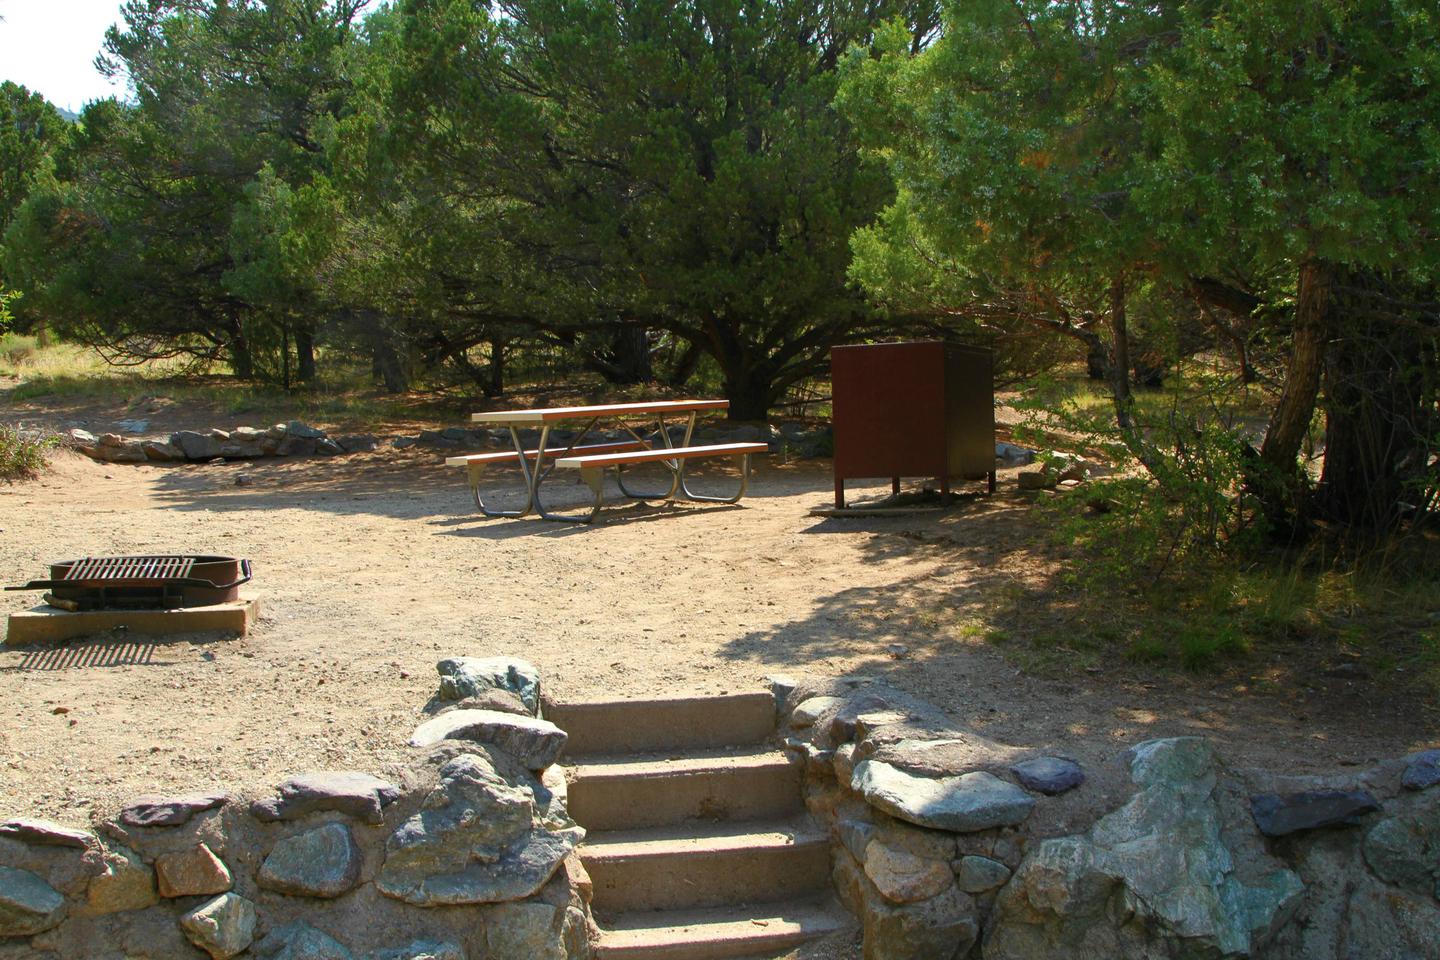 Closeup view of Site #52 tent pad and stairs, with fire ring, picnic table, and bear box. Site is surrounded by pine trees.Site #52, Pinon Flats Campground